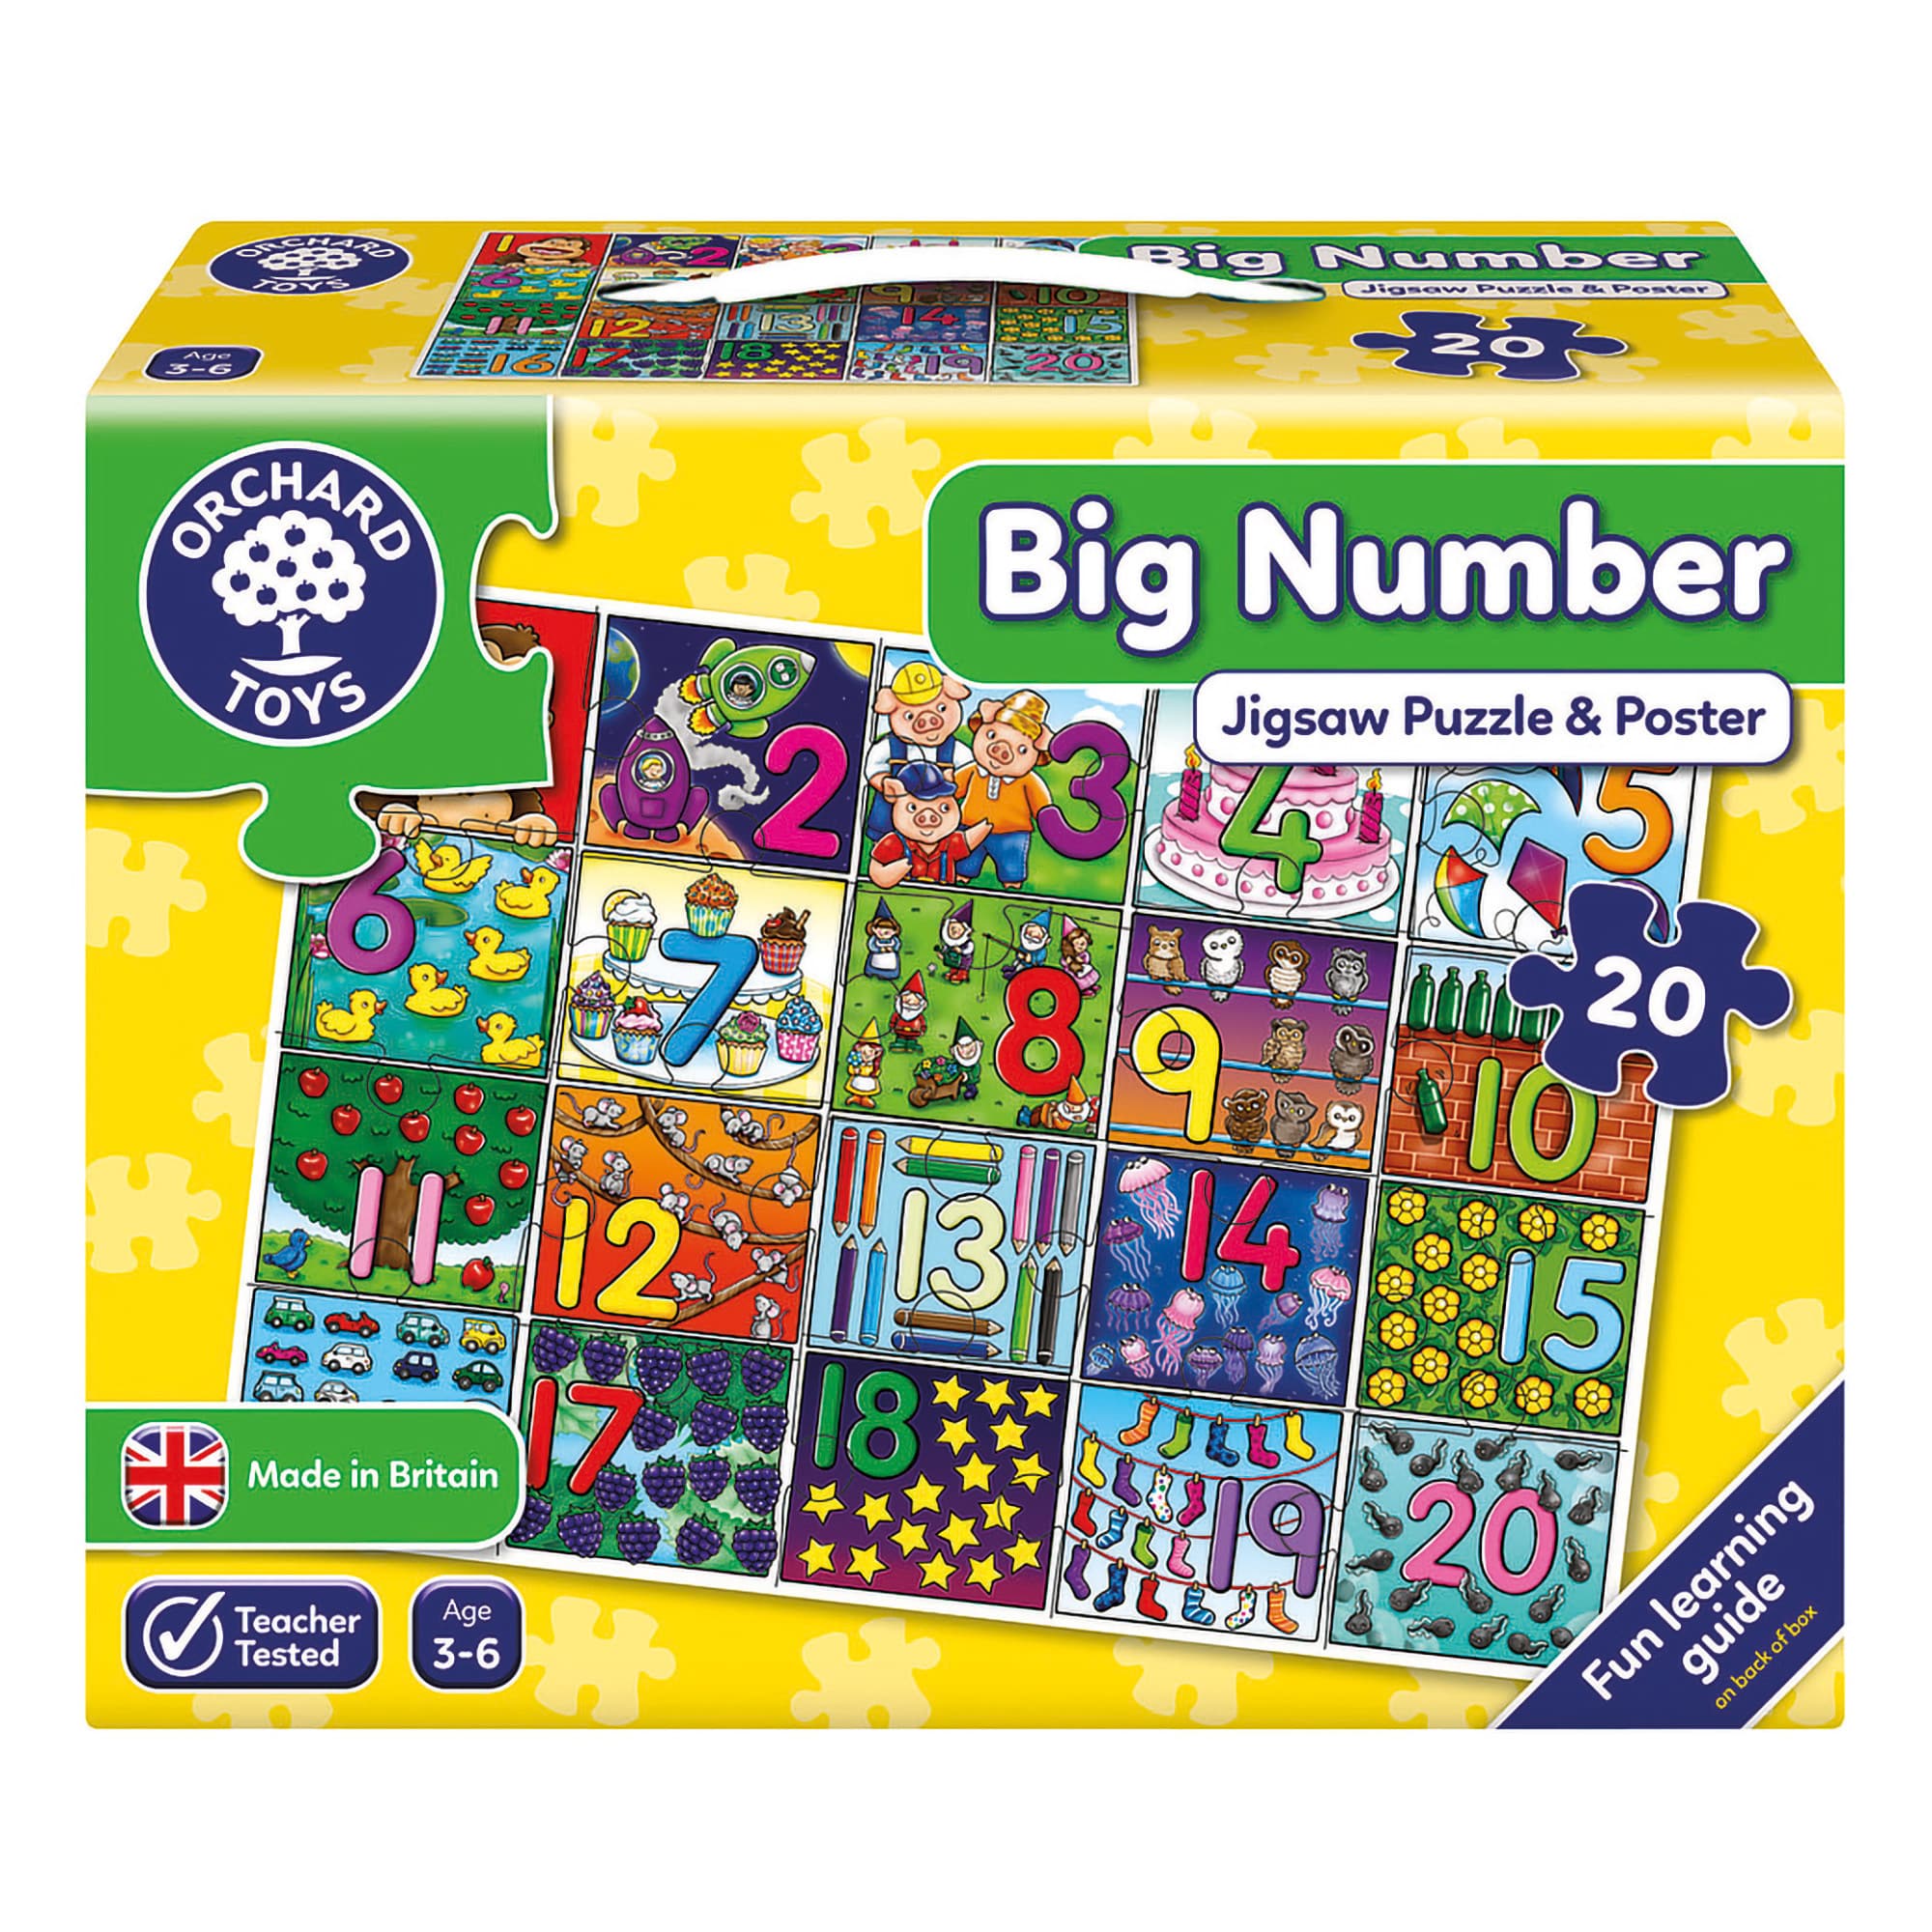 Orchard Toys - Big Number Jigsaw Puzzle & Poster